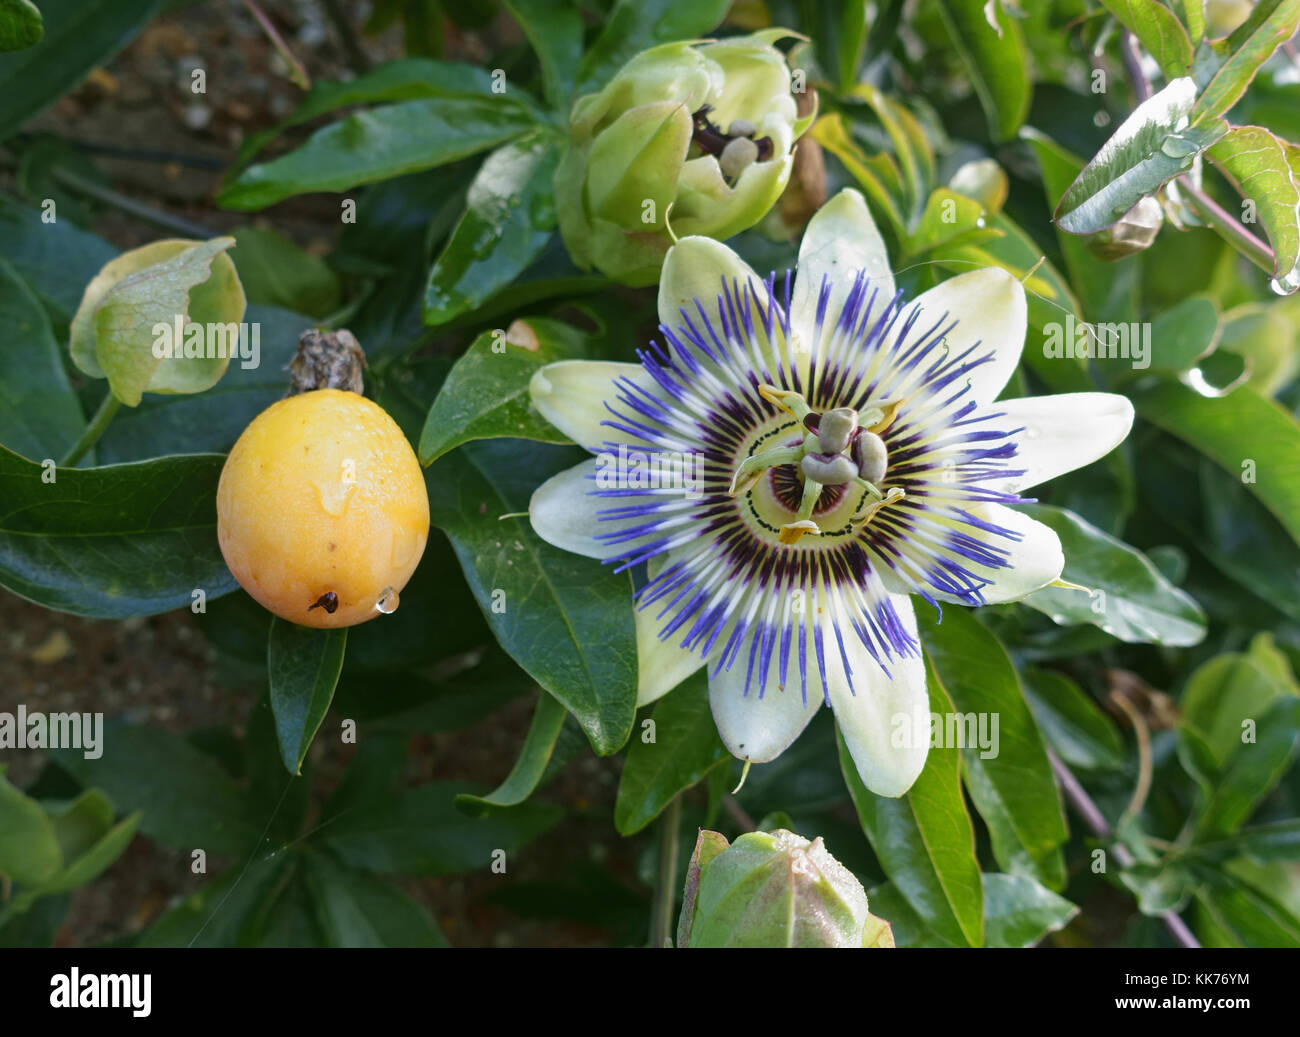 Fruit and flower of an ornamental blue passion flower, Passiflora caerulea, with buds and leaves on climbing vine, September Stock Photo